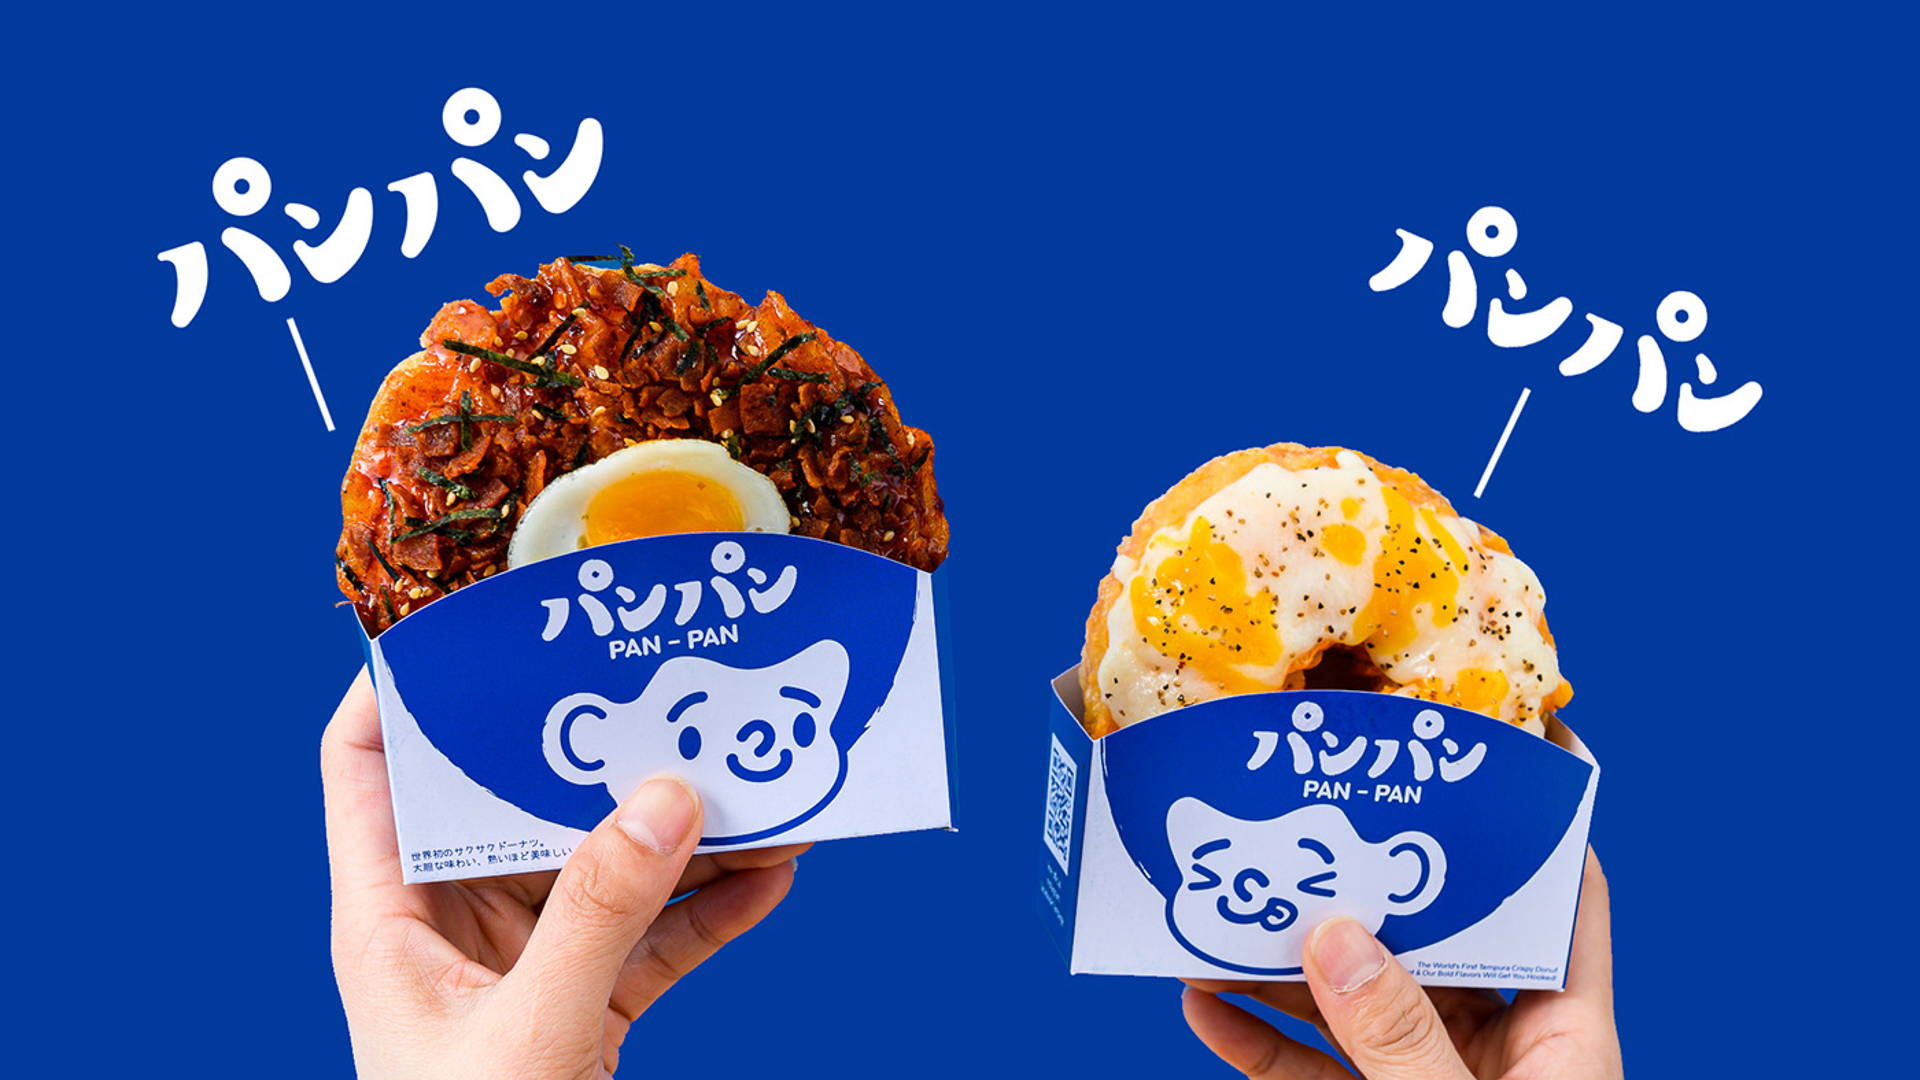 Featured image for Fried Donut Brand Pan-Pan's Packaging Is Quite Cheeky